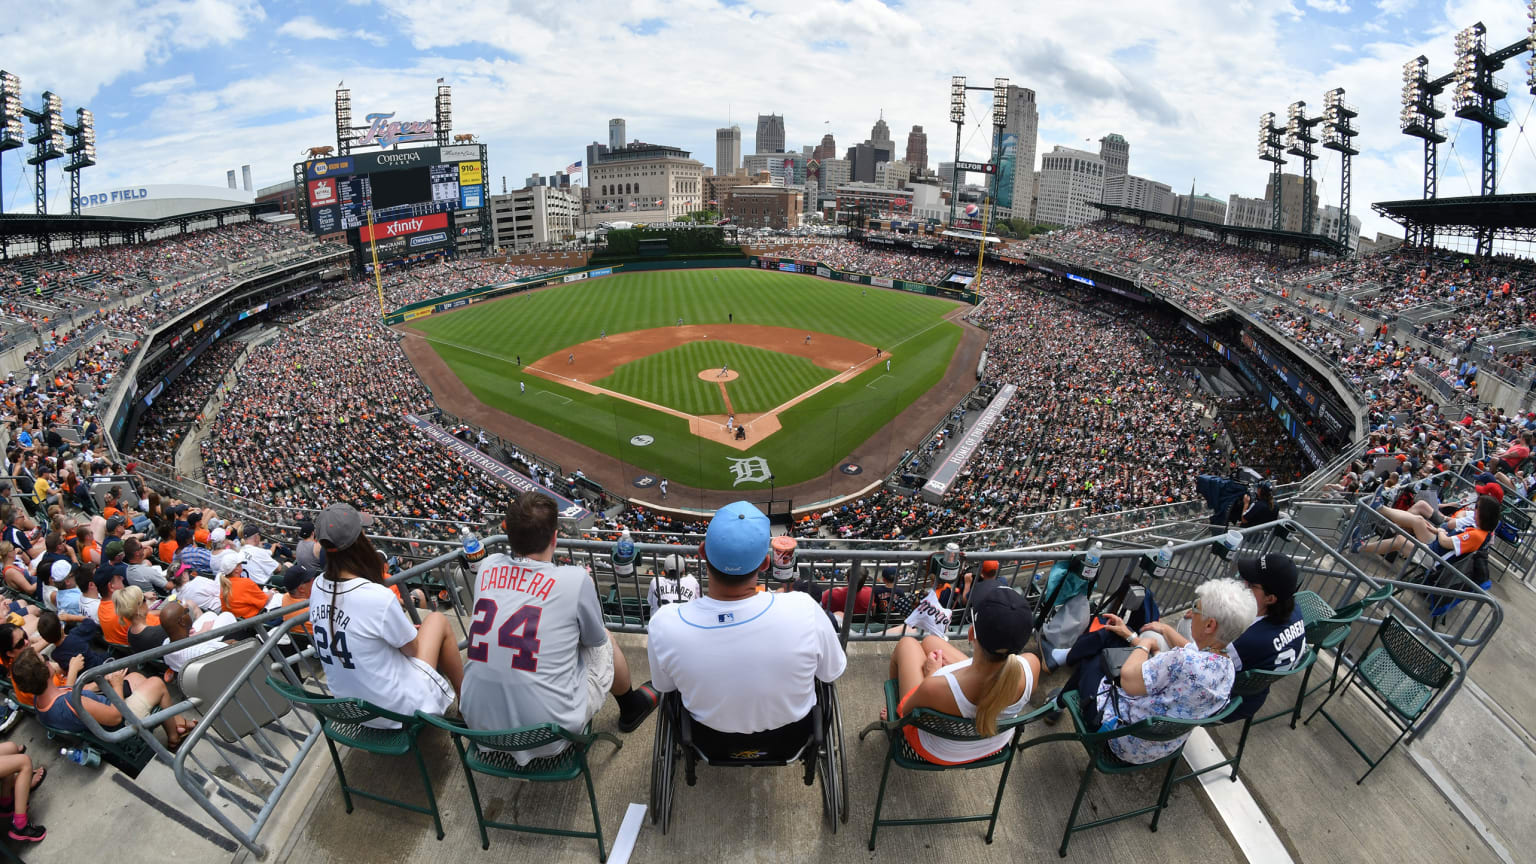 Comerica Park: Home of the Detroit Tigers